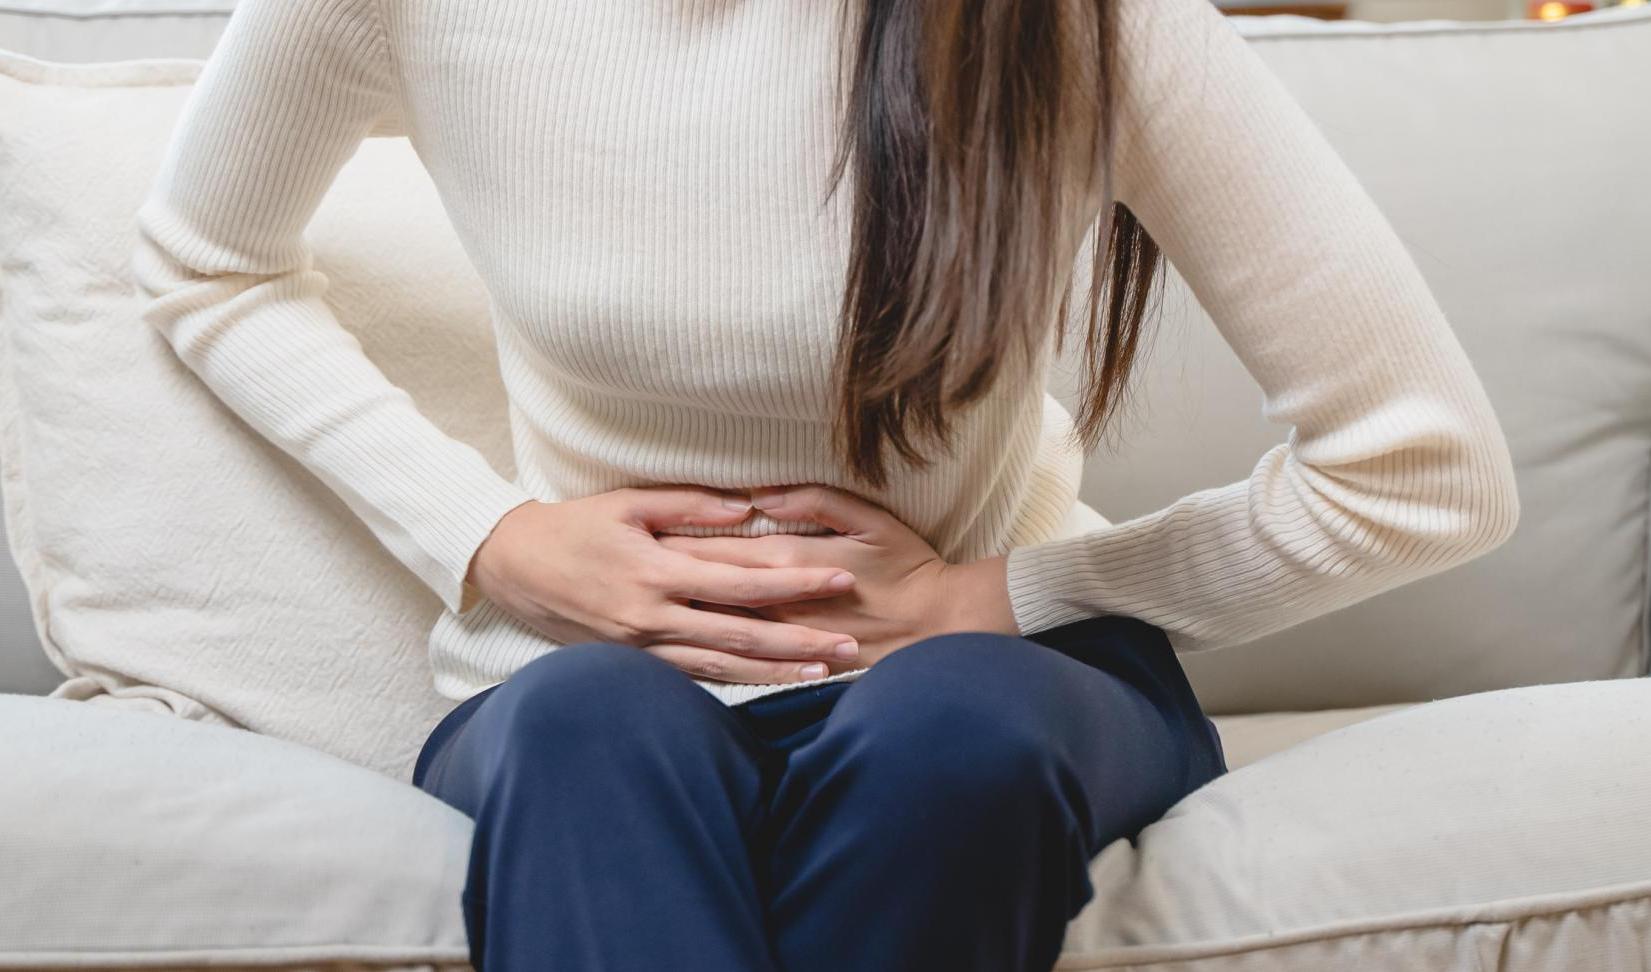 woman have stomach pain from menstruation.